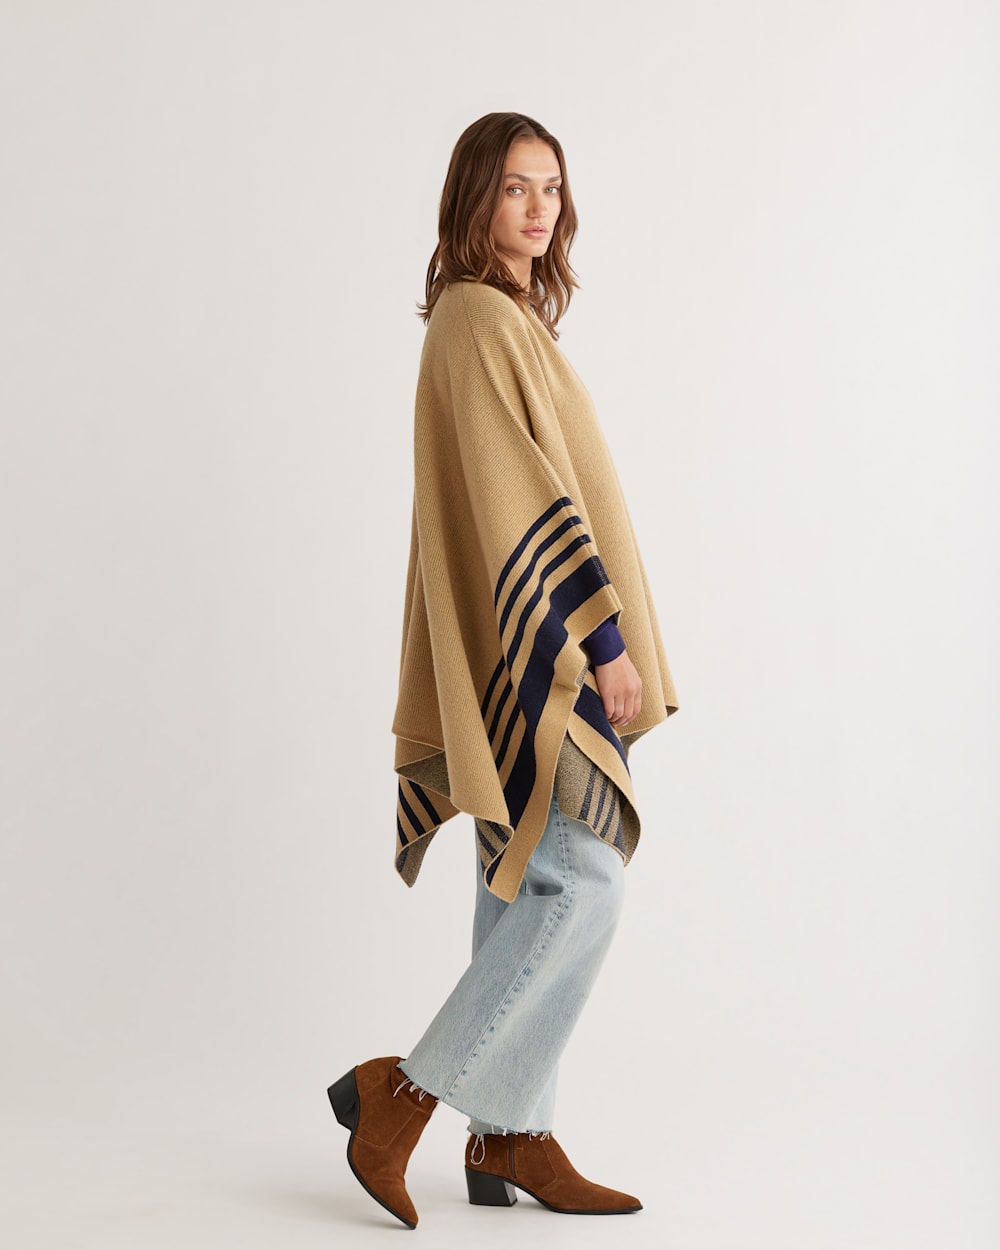 ALTERNATE VIEW OF WOMEN'S LAMBSWOOL KNIT BLANKET CAPE IN CAMEL/NAVY image number 2